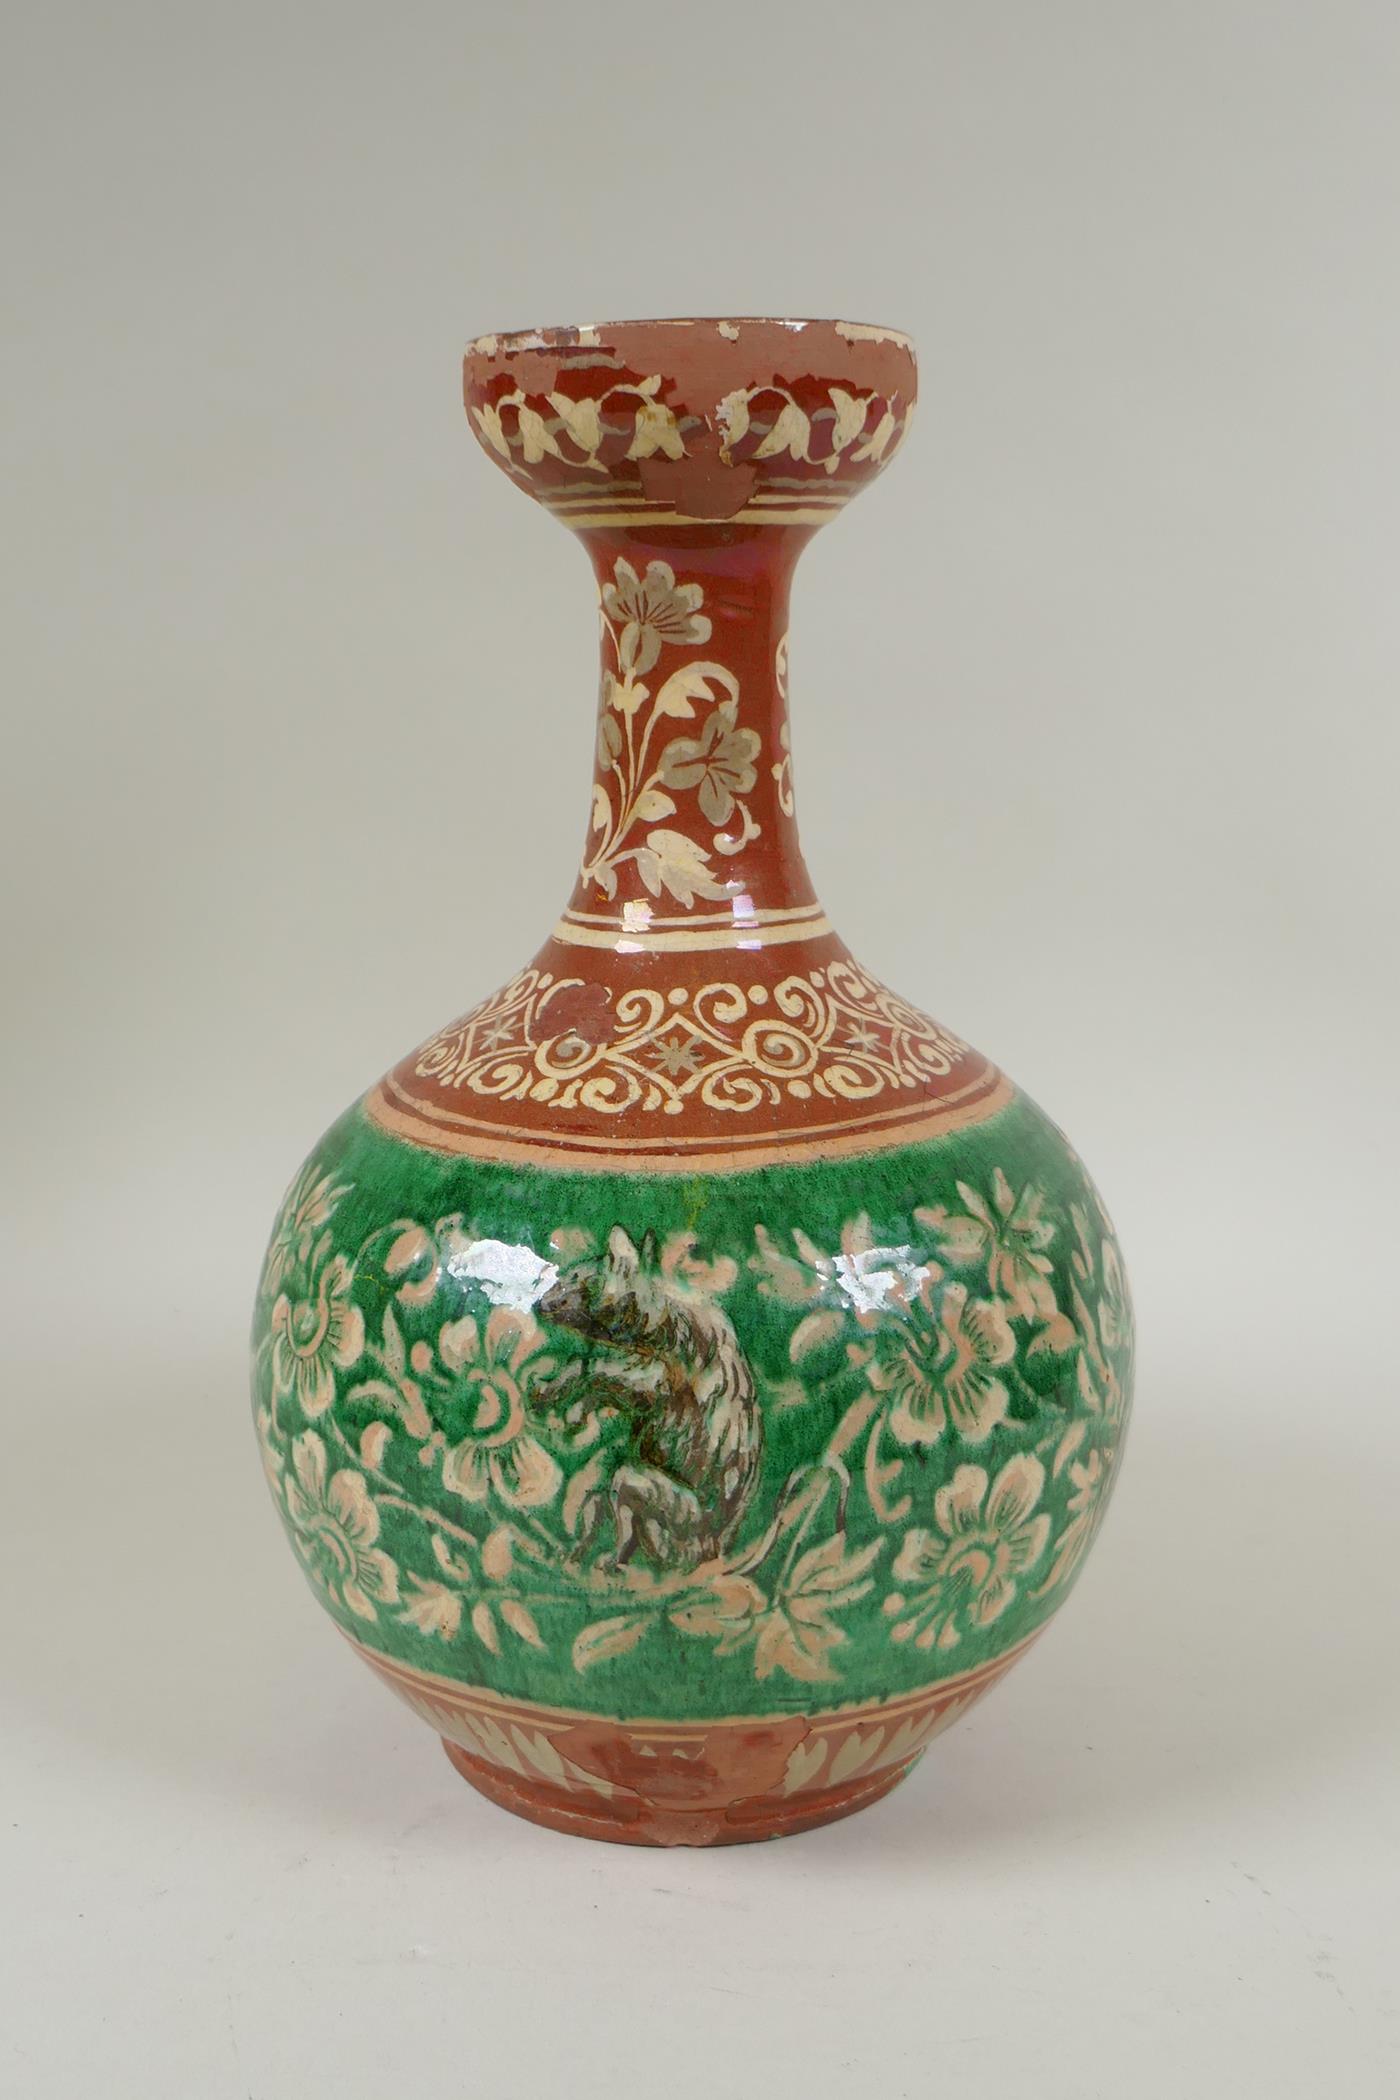 An antique Islamic redware vase decorated with flowers and rodents, chips to glaze, 27cm high - Image 4 of 6